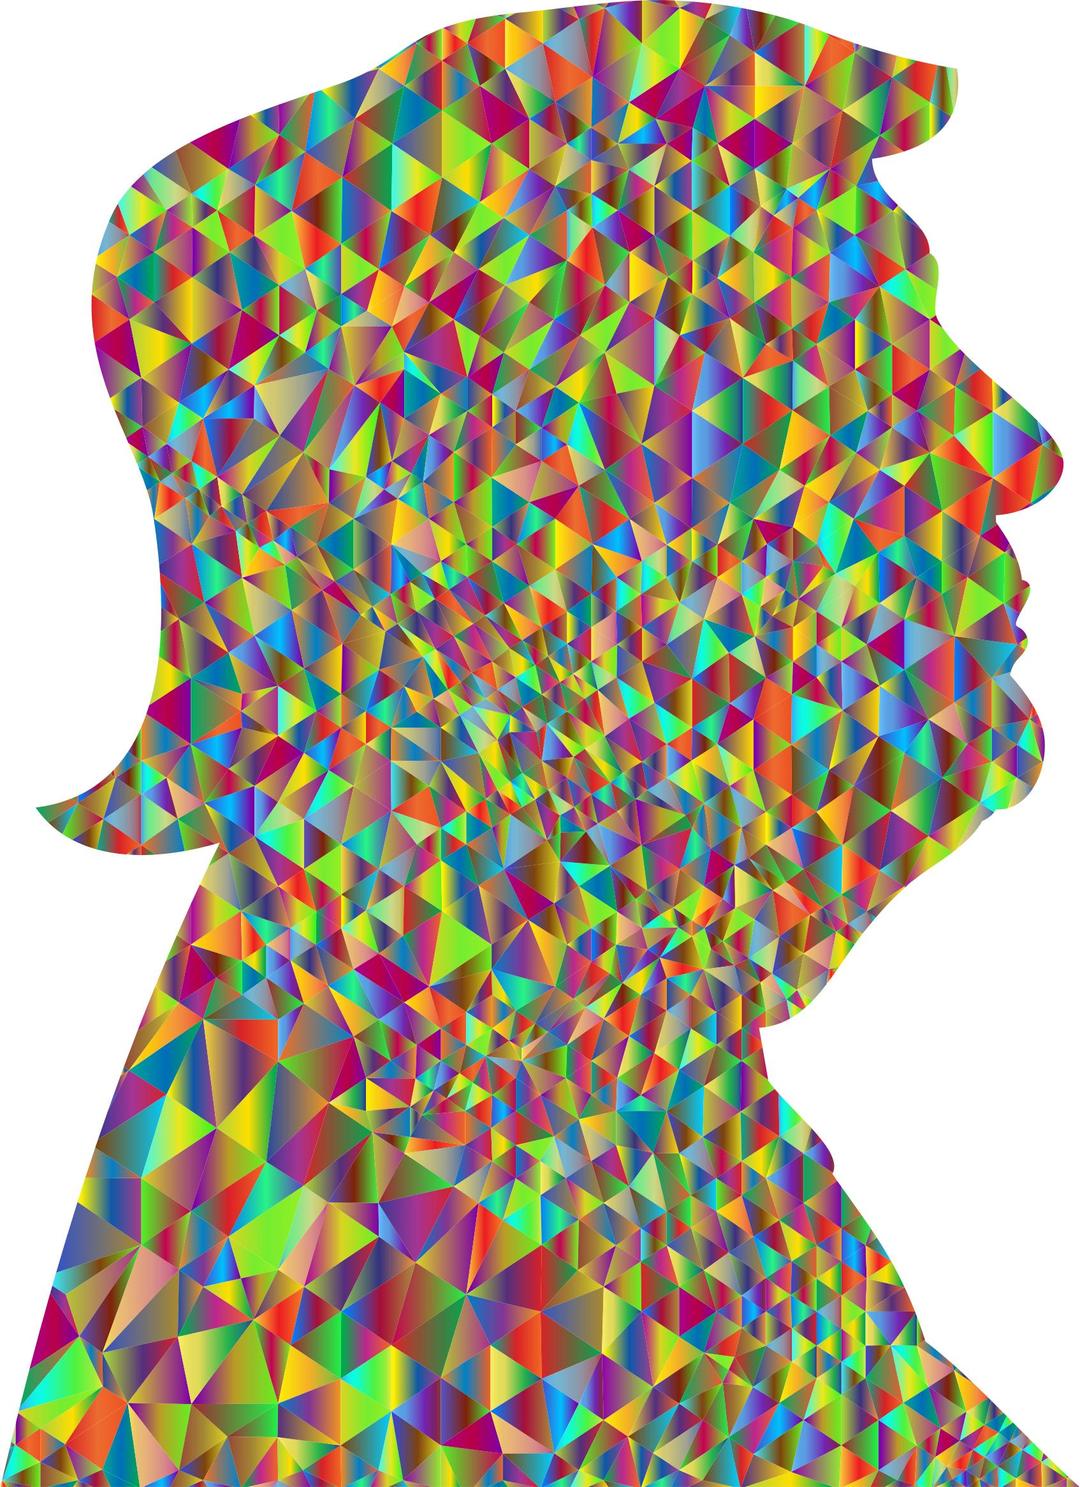 Polychromatic Low Poly Trump Profile Silhouette png transparent